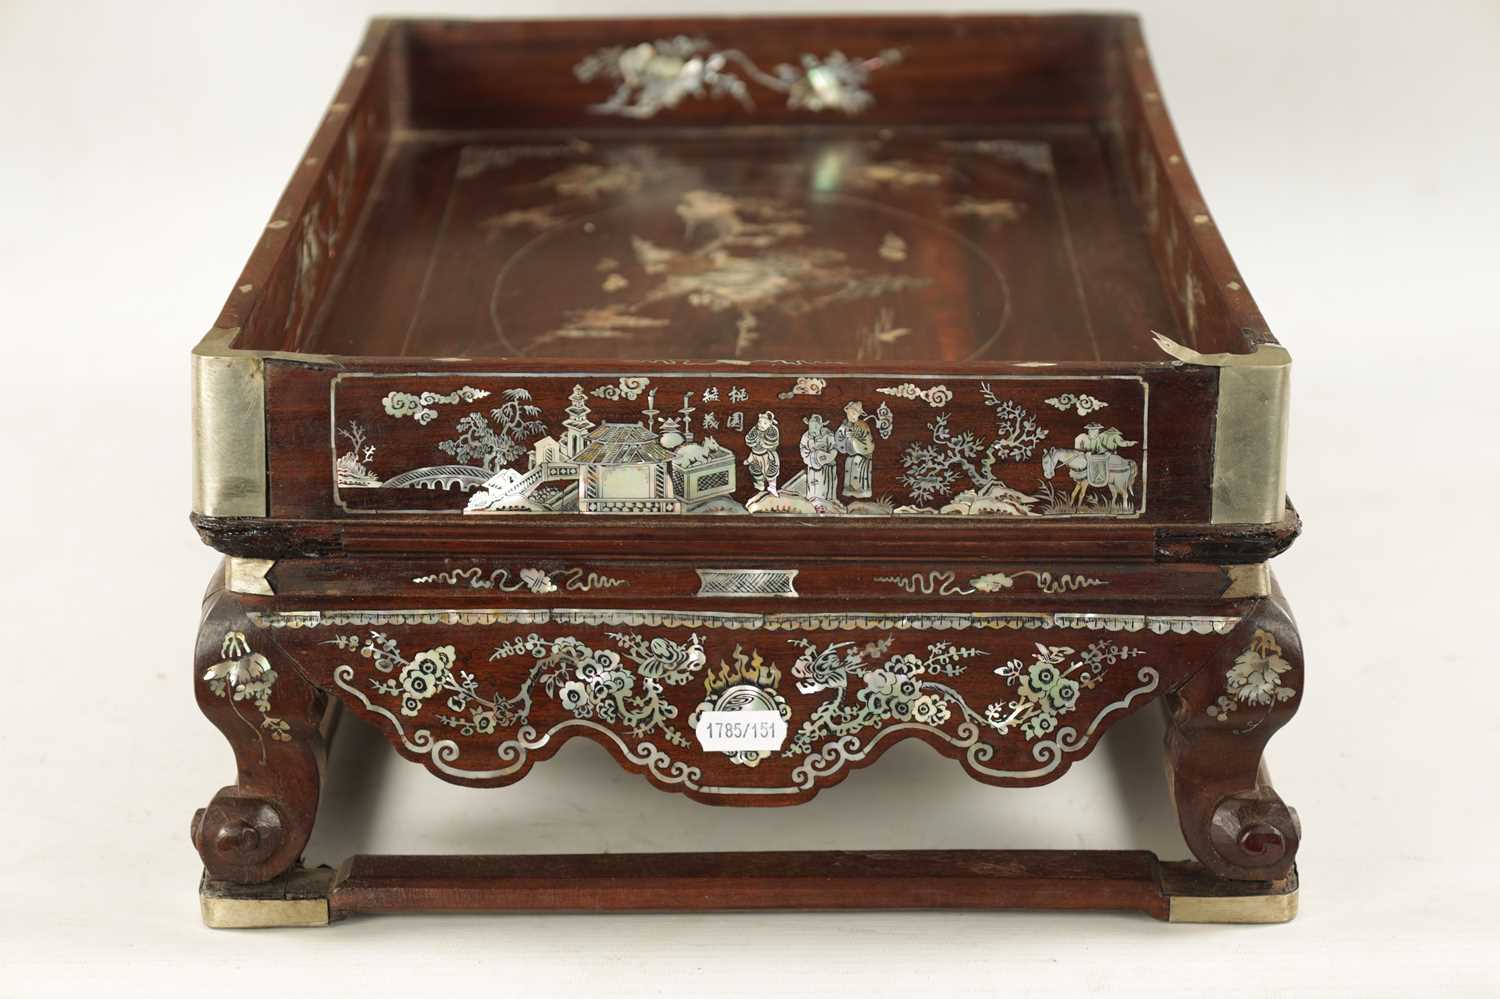 A 19TH CENTURY CHINESE HARDWOOD AND MOTHER OF PEARL INLAID TRAY ON STAND - Image 7 of 7